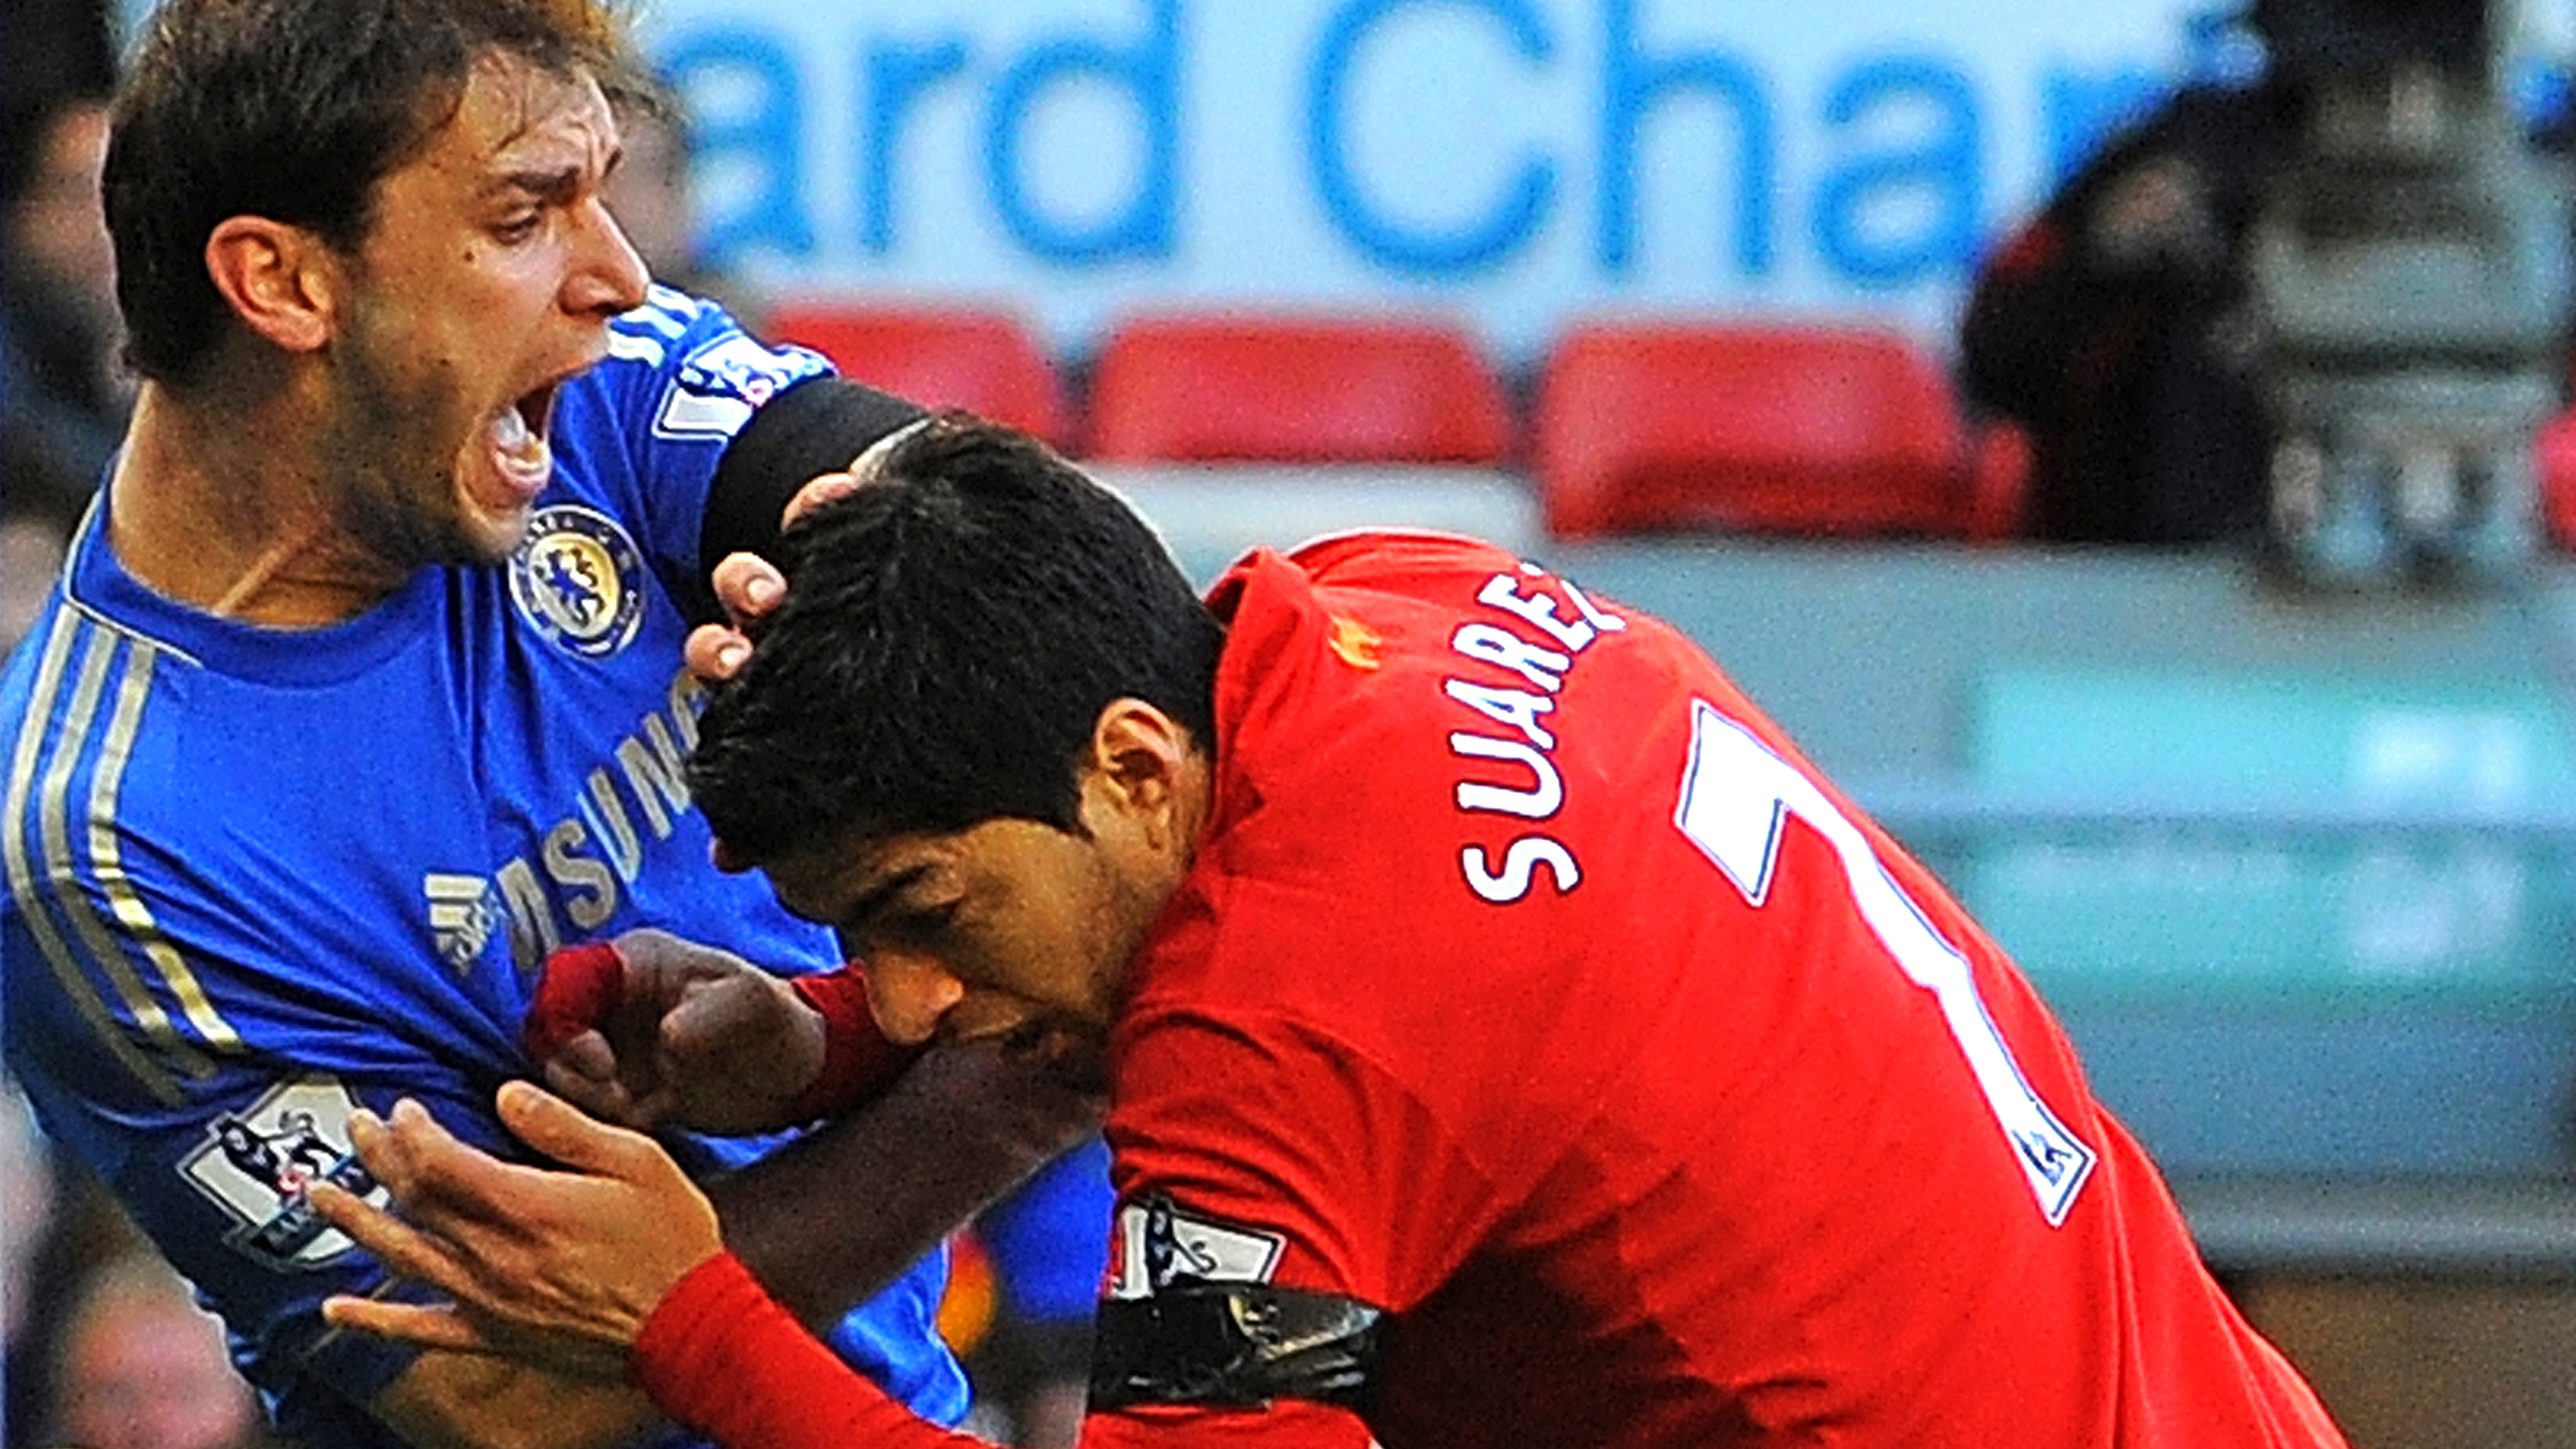 With Liverpool striker Luis Suarez accepting his 10-match ban for biting another player, Sports Reporter Jordan Jarrett-Bryan looks at the reaction to the controversy (Getty)